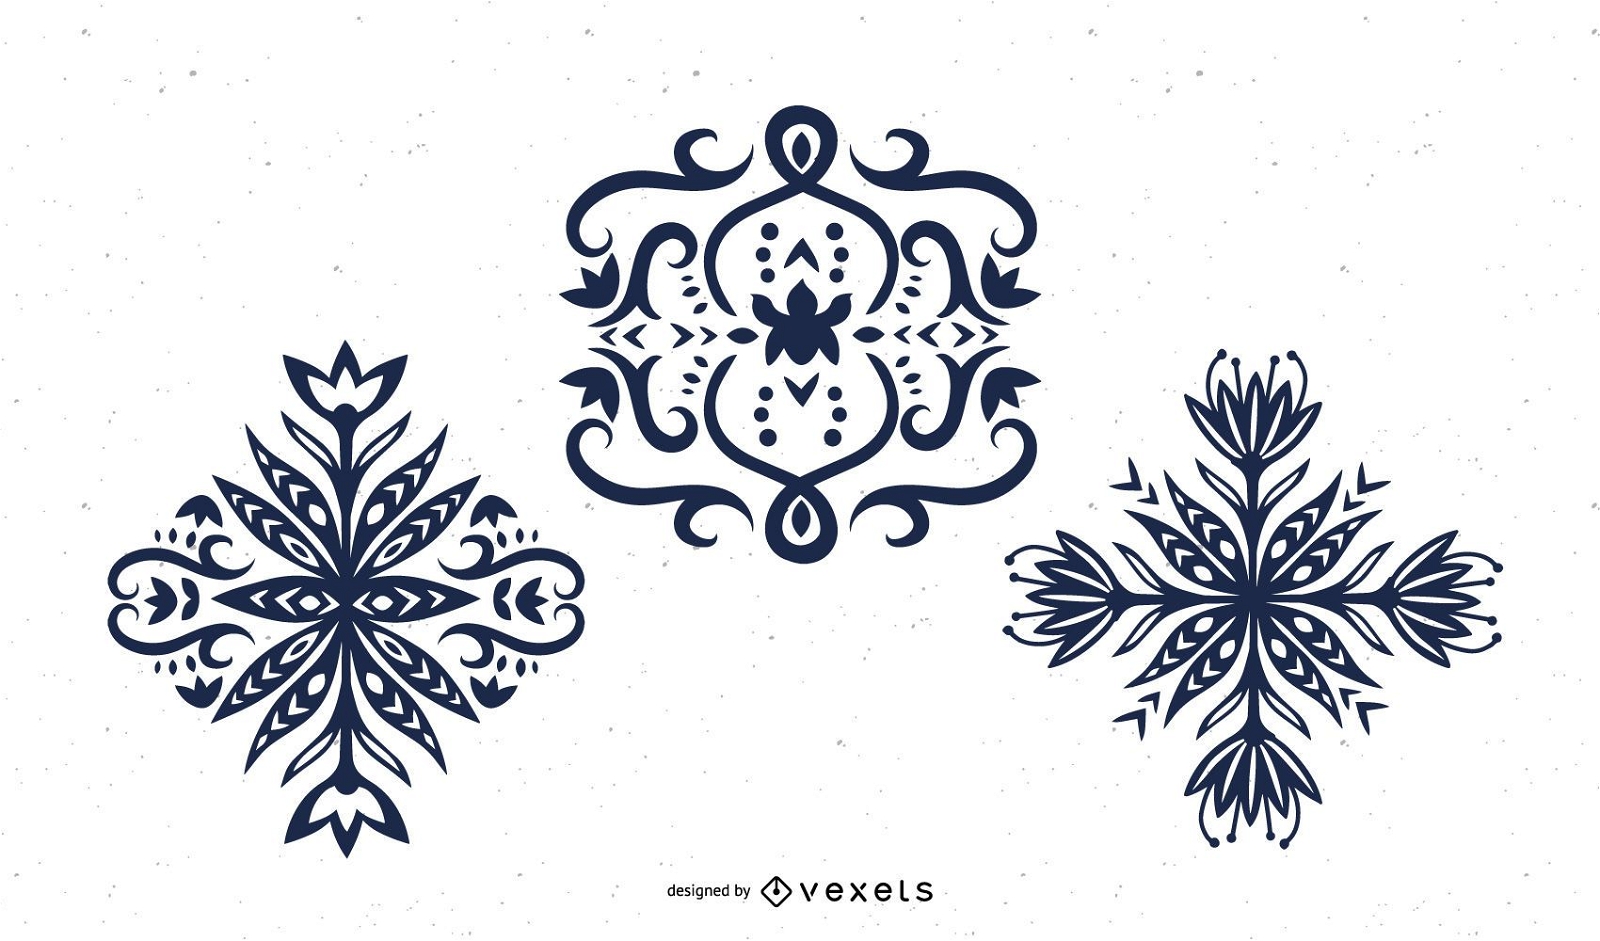 Flourishes free vector pack